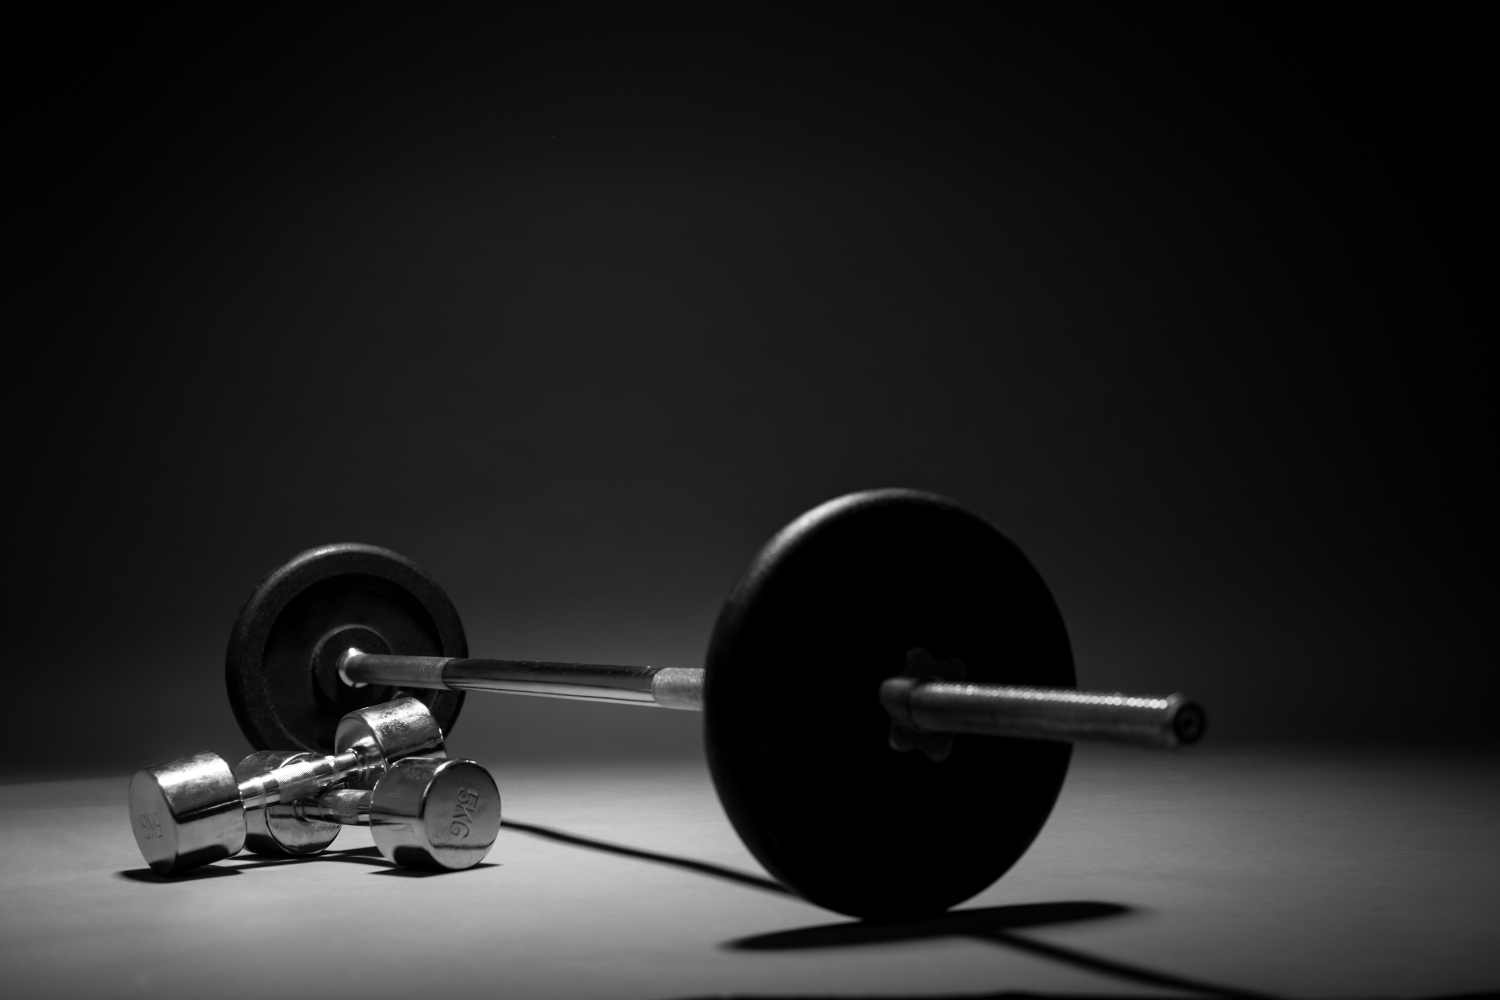 dumbbells vs barbells for building muscle and strength